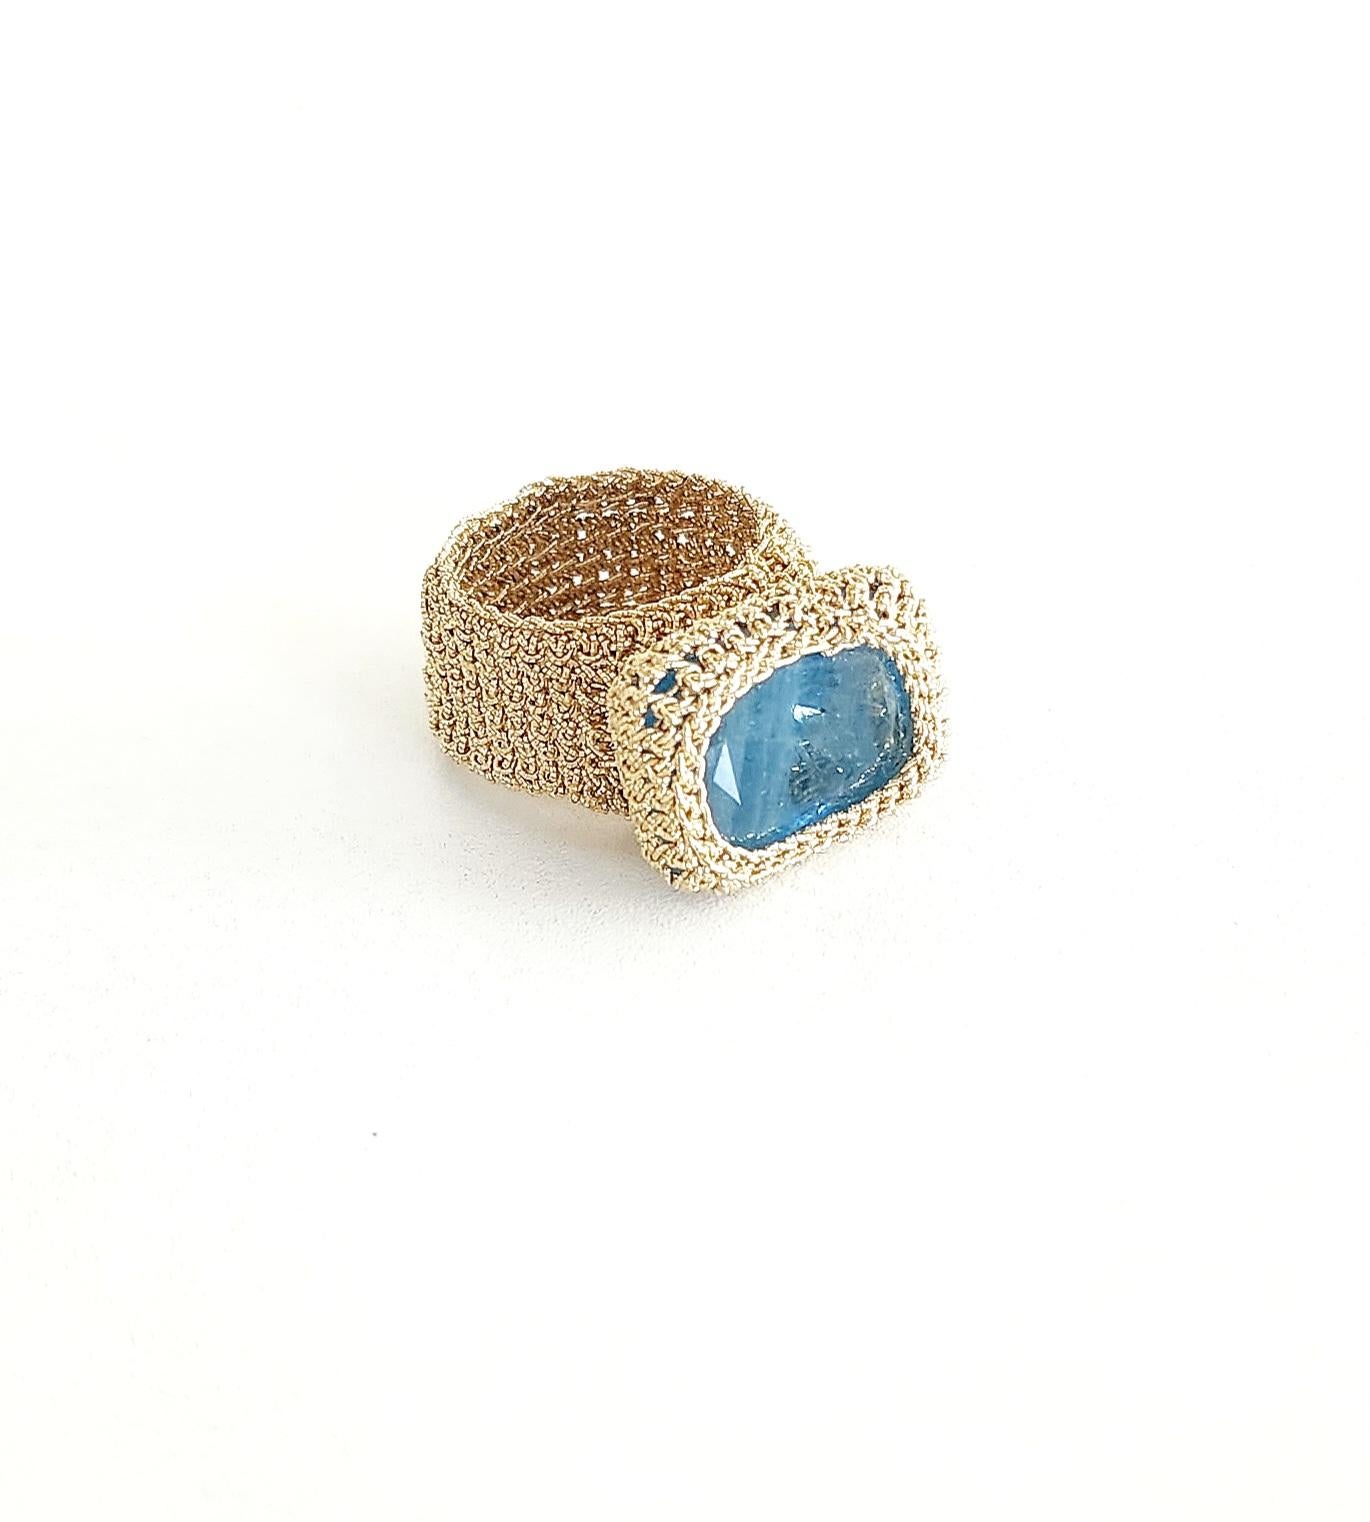 Beautiful, one of a kind crochet ring. It is meticulously handcrafted with 18 karat gold thread. The thread is made of an 18 karat gold wire which is flattened and wrapped around a cotton thread. The stone is a beautiful dark rectangular shaped